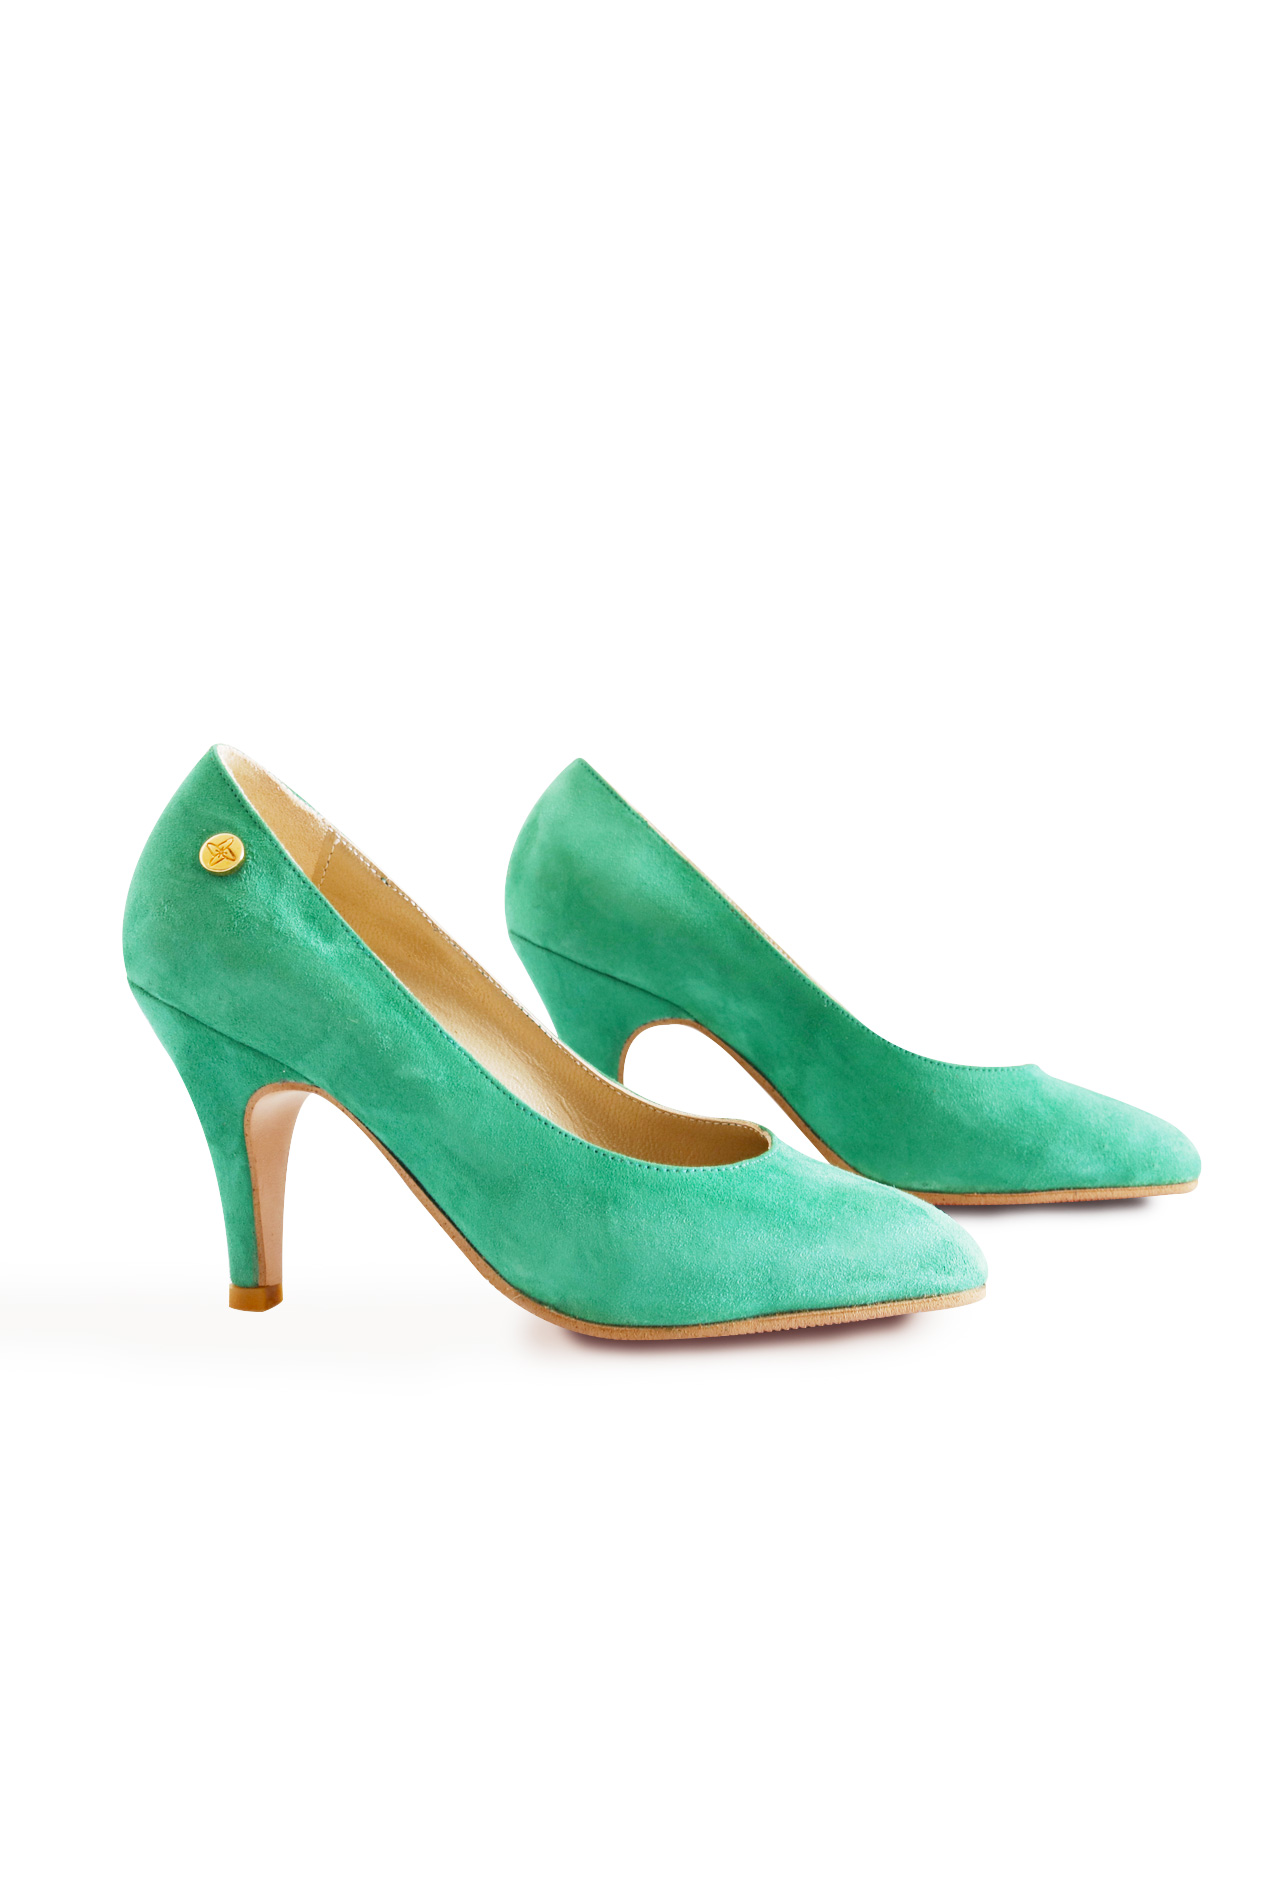 September Useless Unauthorized Emerald Green Suede Stilettos for Petites! | Small Shoes by Cristina Correia